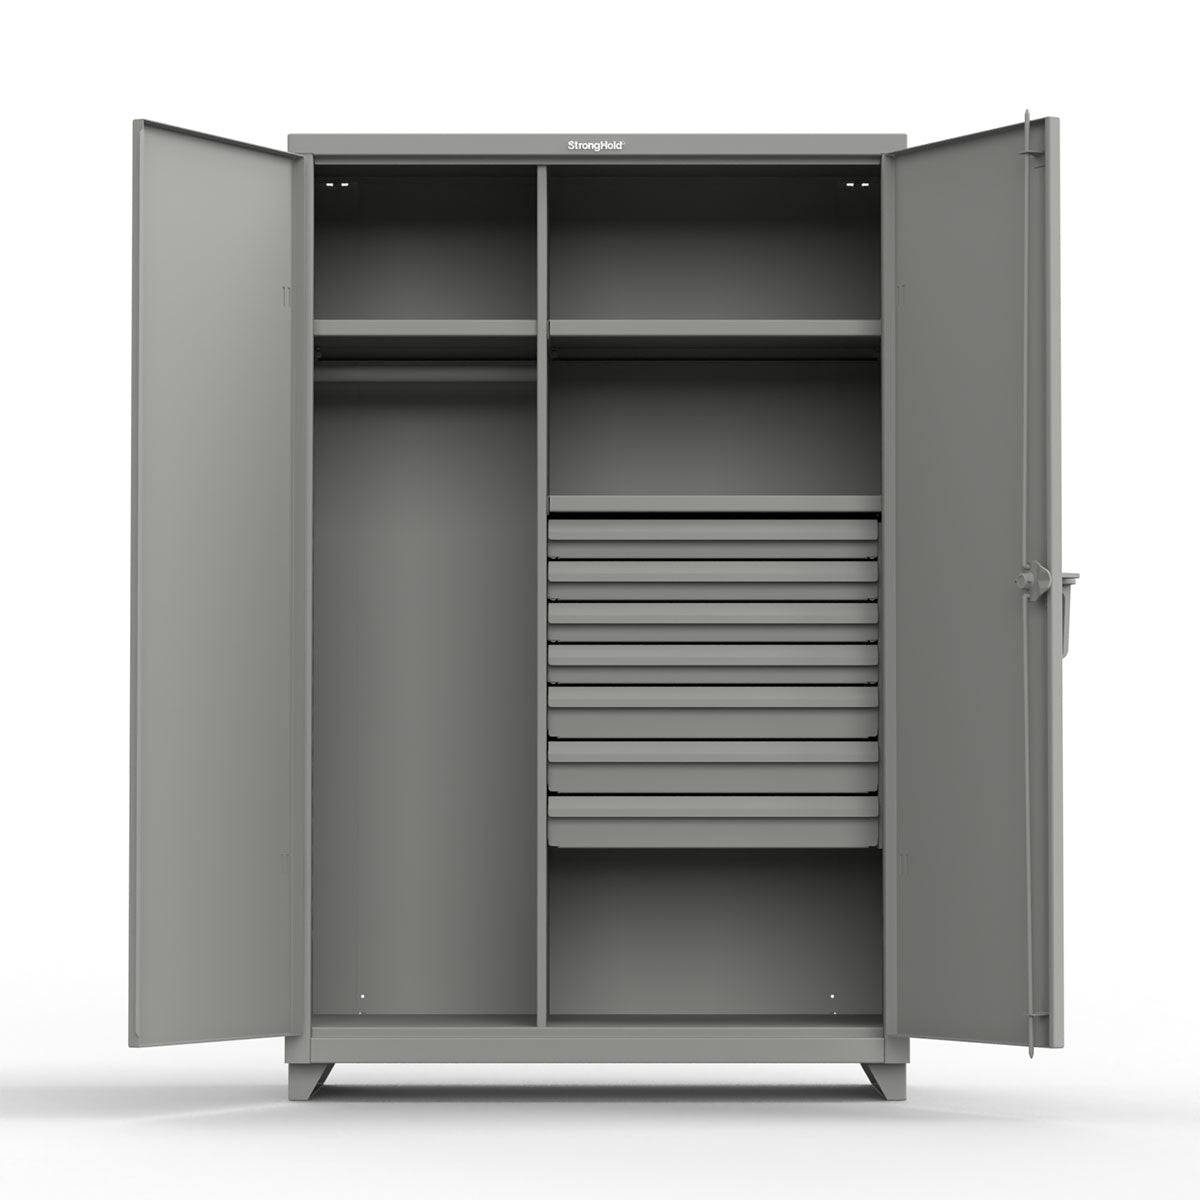 Extra Heavy Duty 14 GA Uniform Cabinet with 7 Drawers, 3 Shelves - 48 In. W x 24 In. D x 75 In. H - Strong Hold